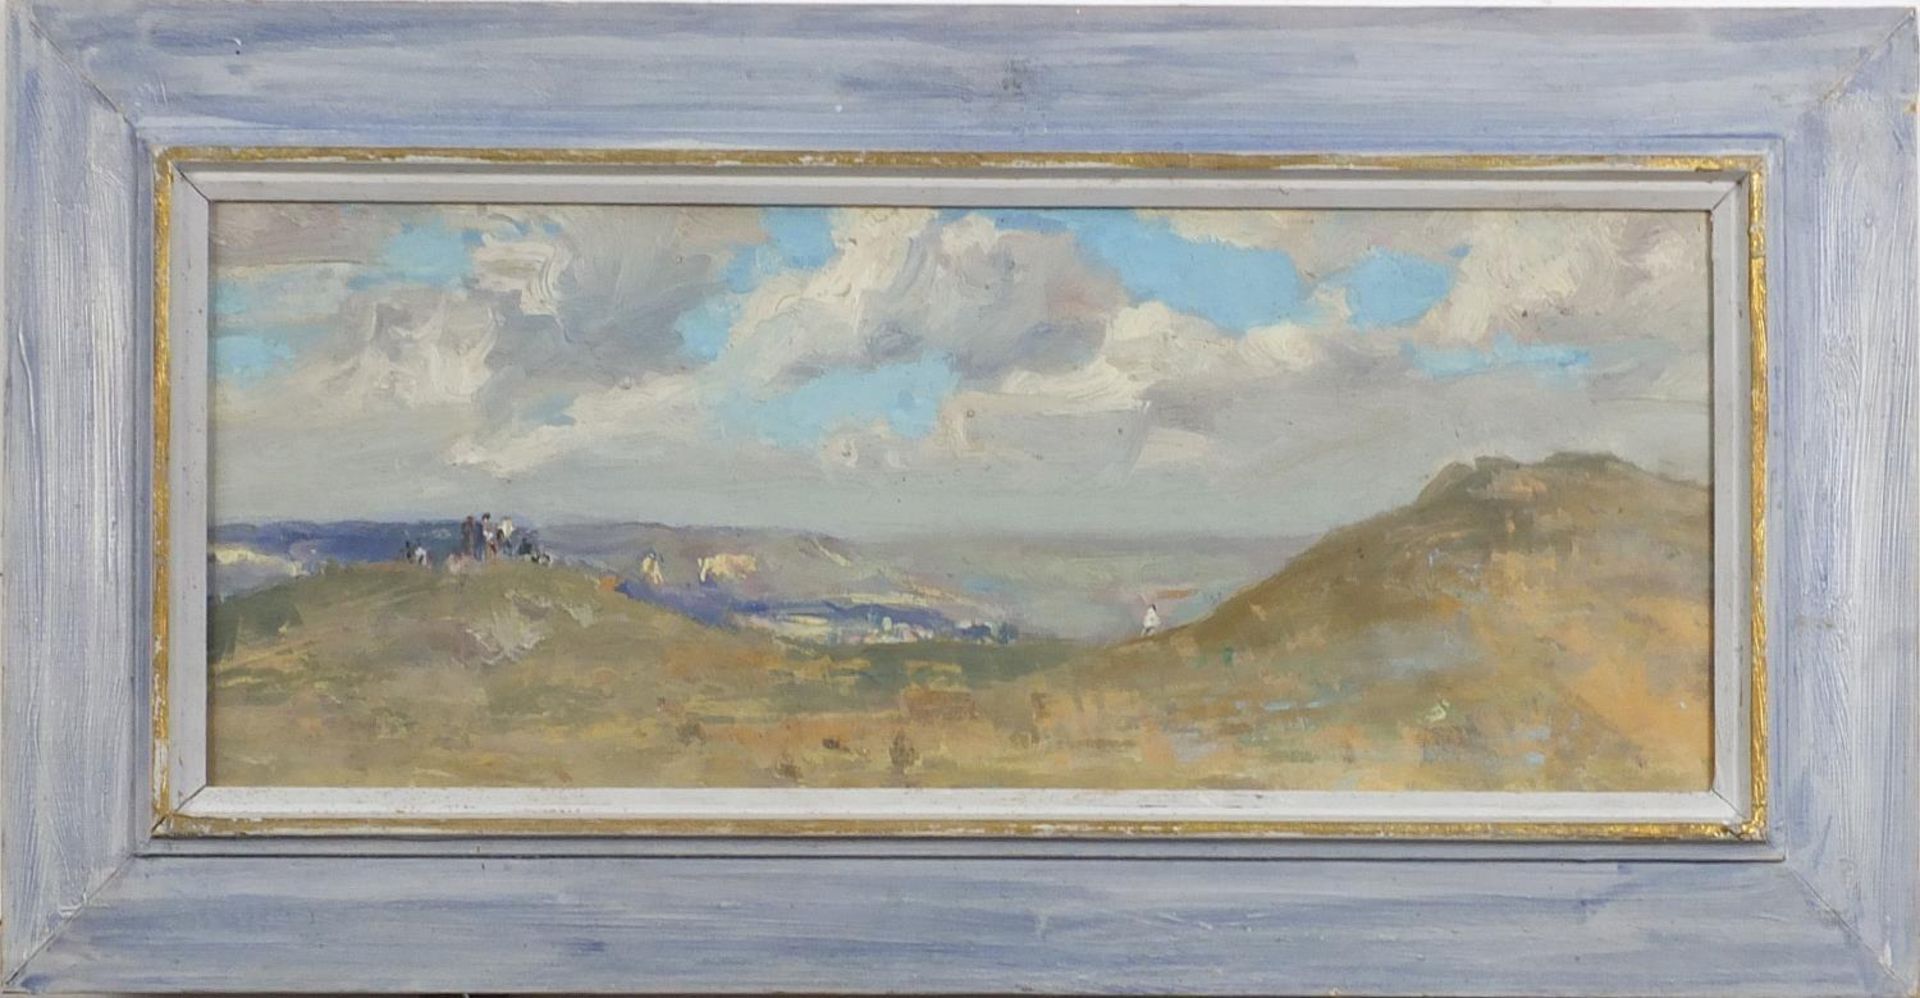 Attributed to Alexei Sokolov - Crimean landscape, oil on board, mounted and framed, 41cm x 15.5cm - Image 2 of 4